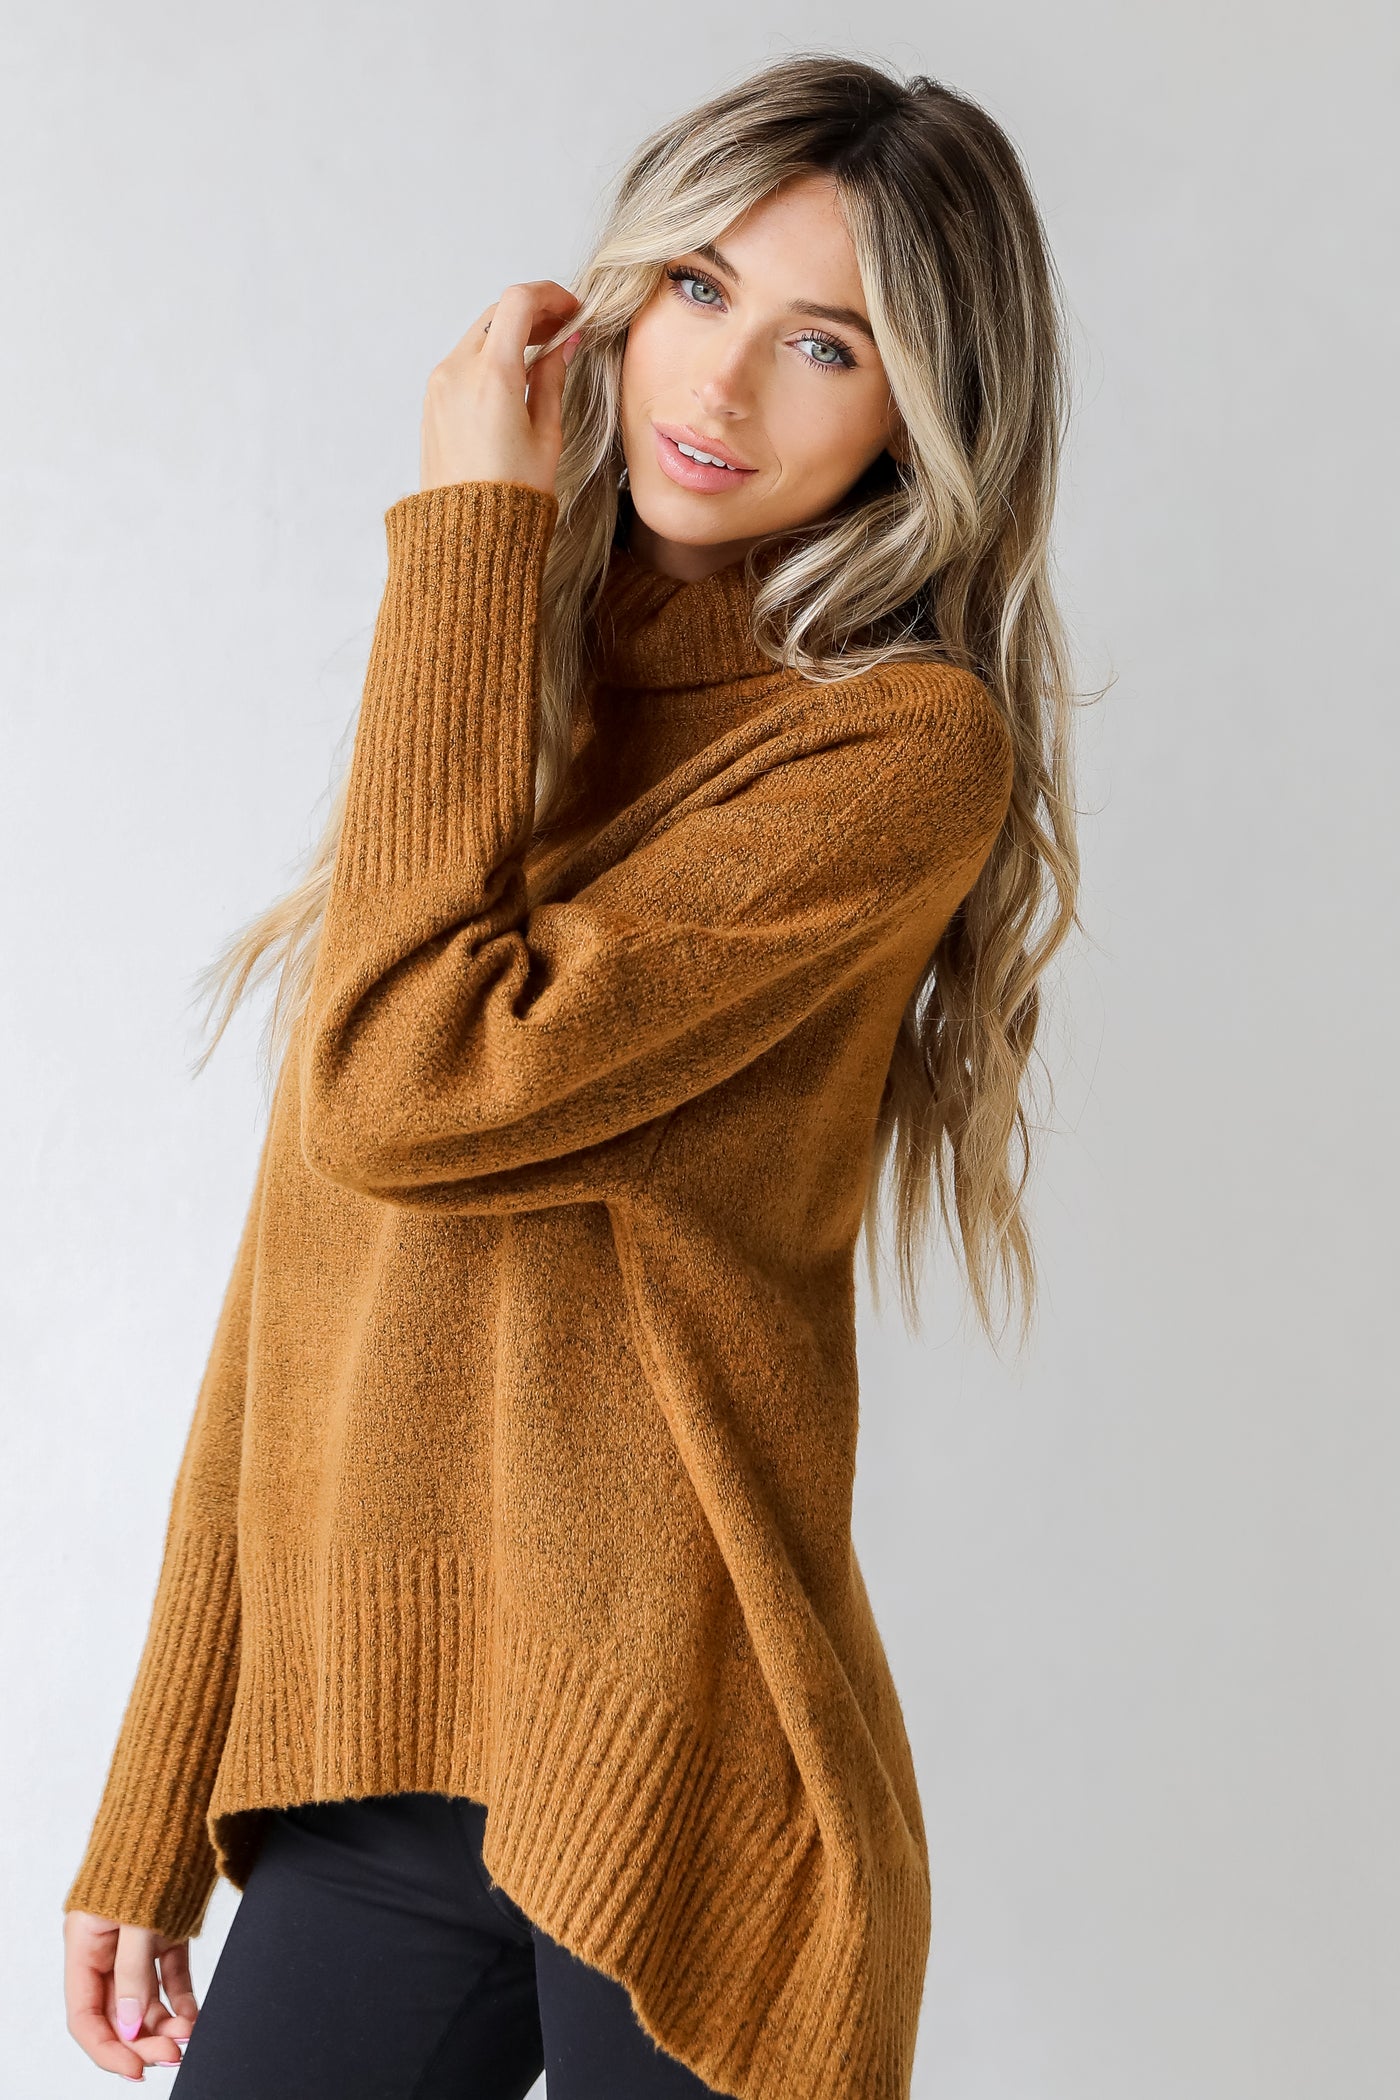 Turtleneck Sweater in camel side view